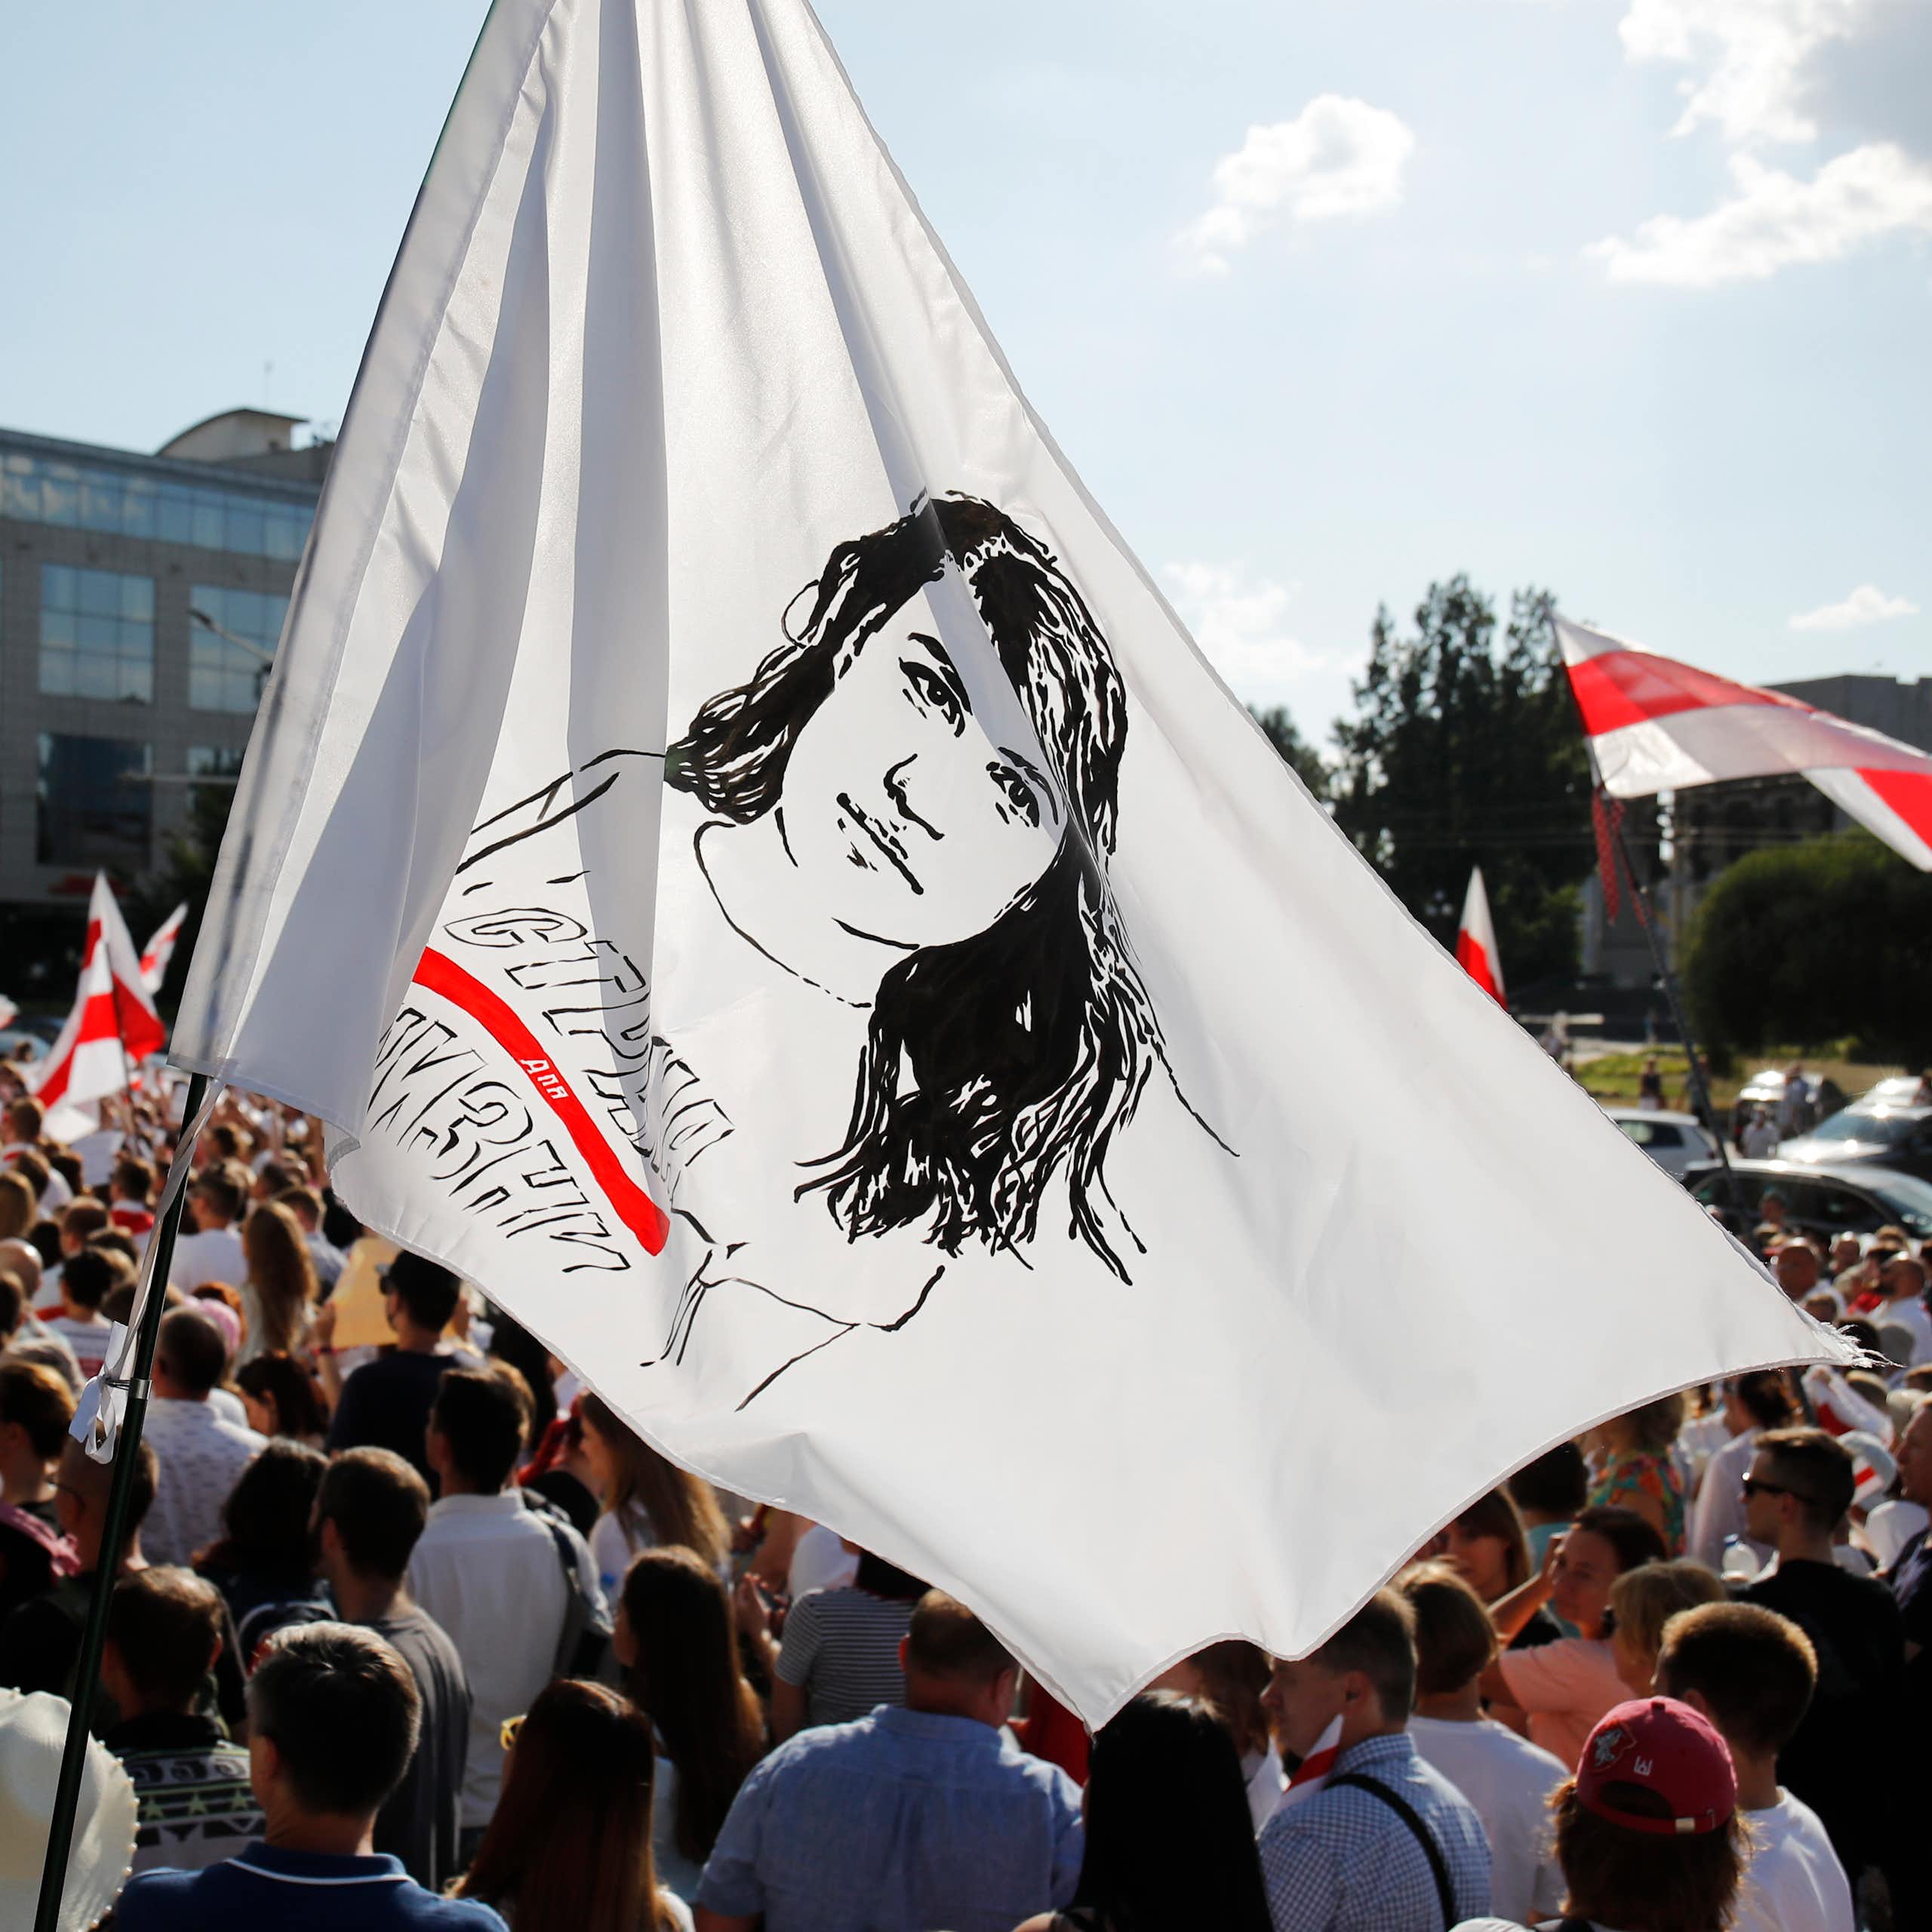 People hold a flag with a sketch of a woman's face amid a large rally.